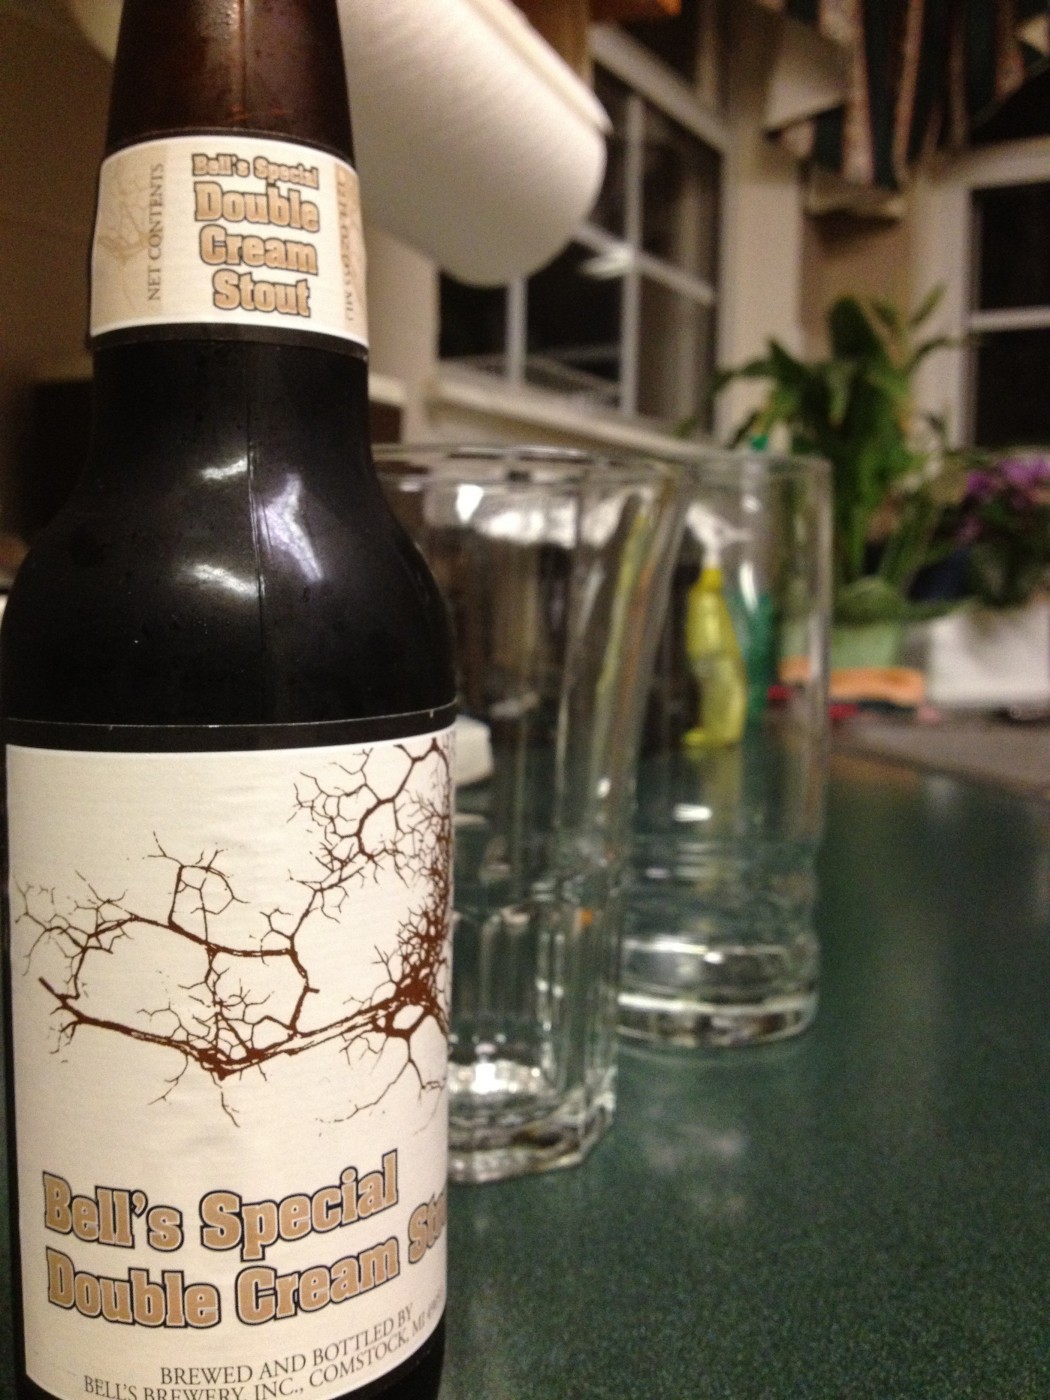 One Minute Beer Review – Bell’s Special Double Cream Stout